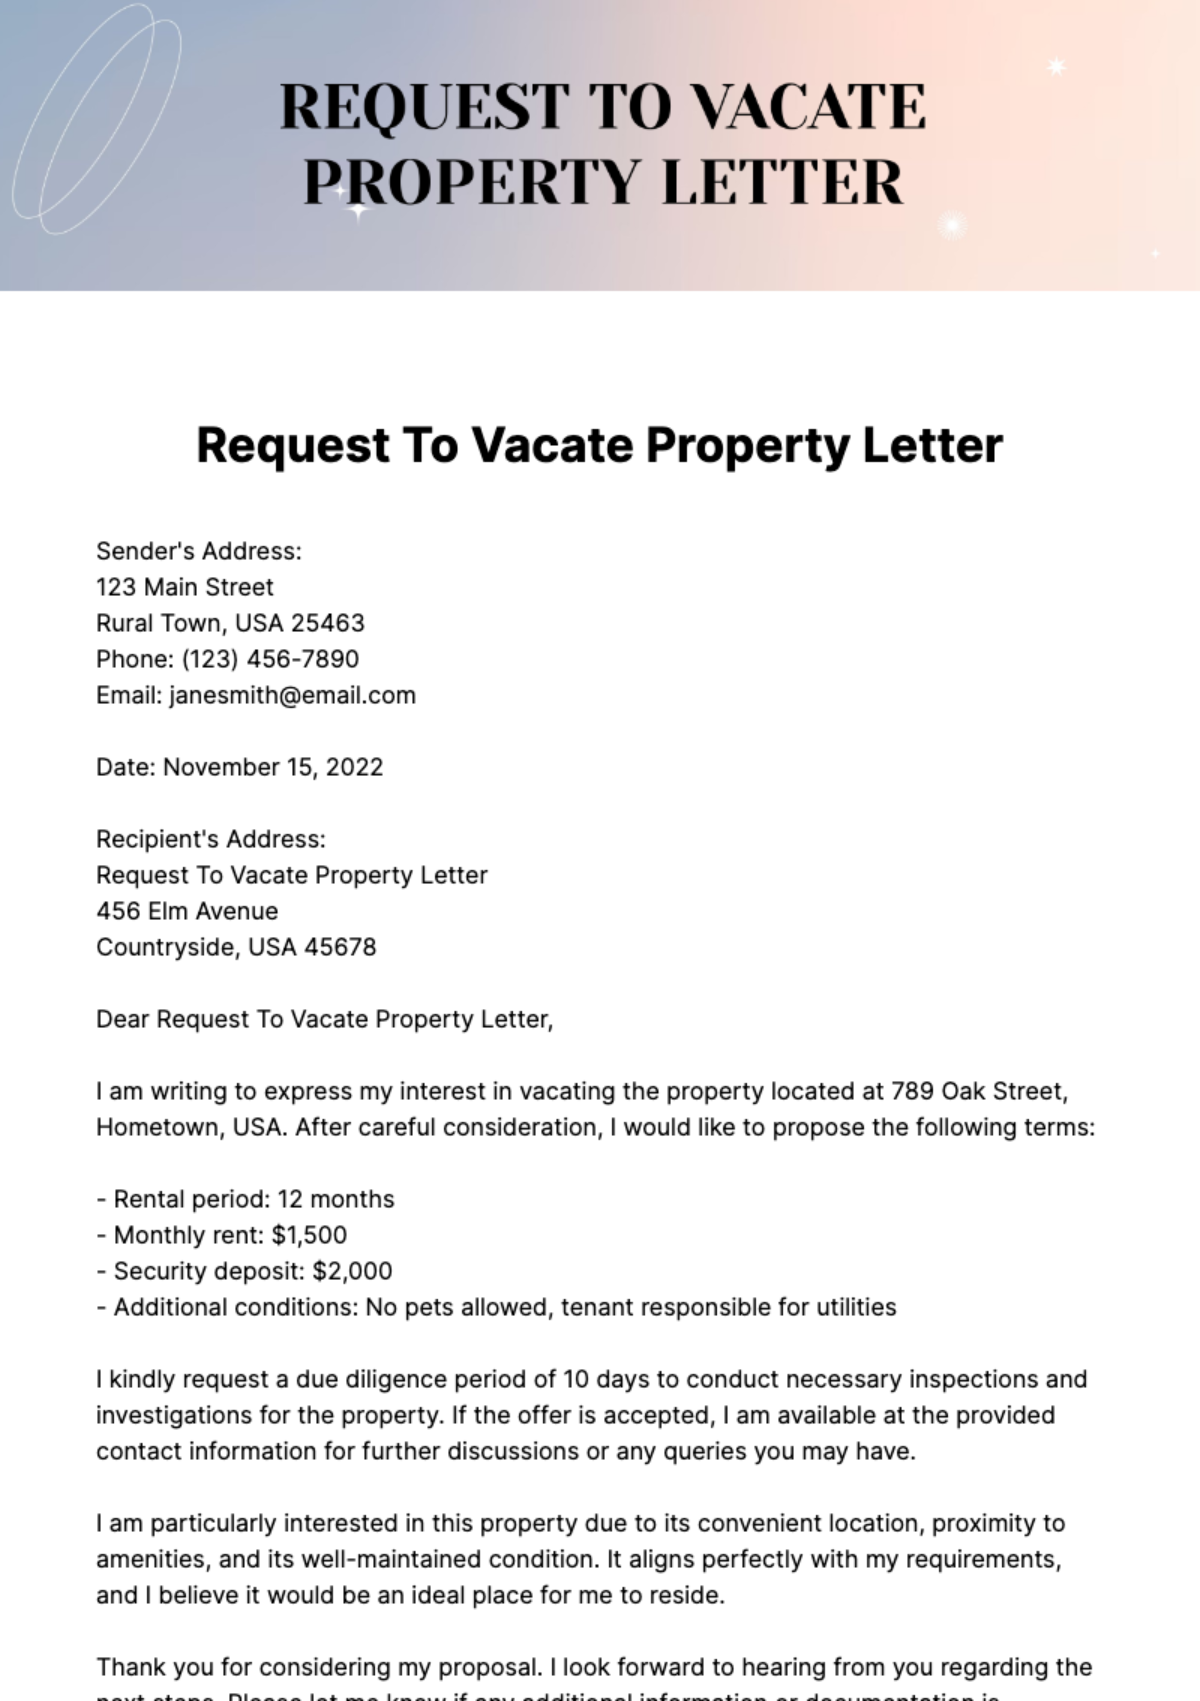 Free Request To Vacate Property Letter Template